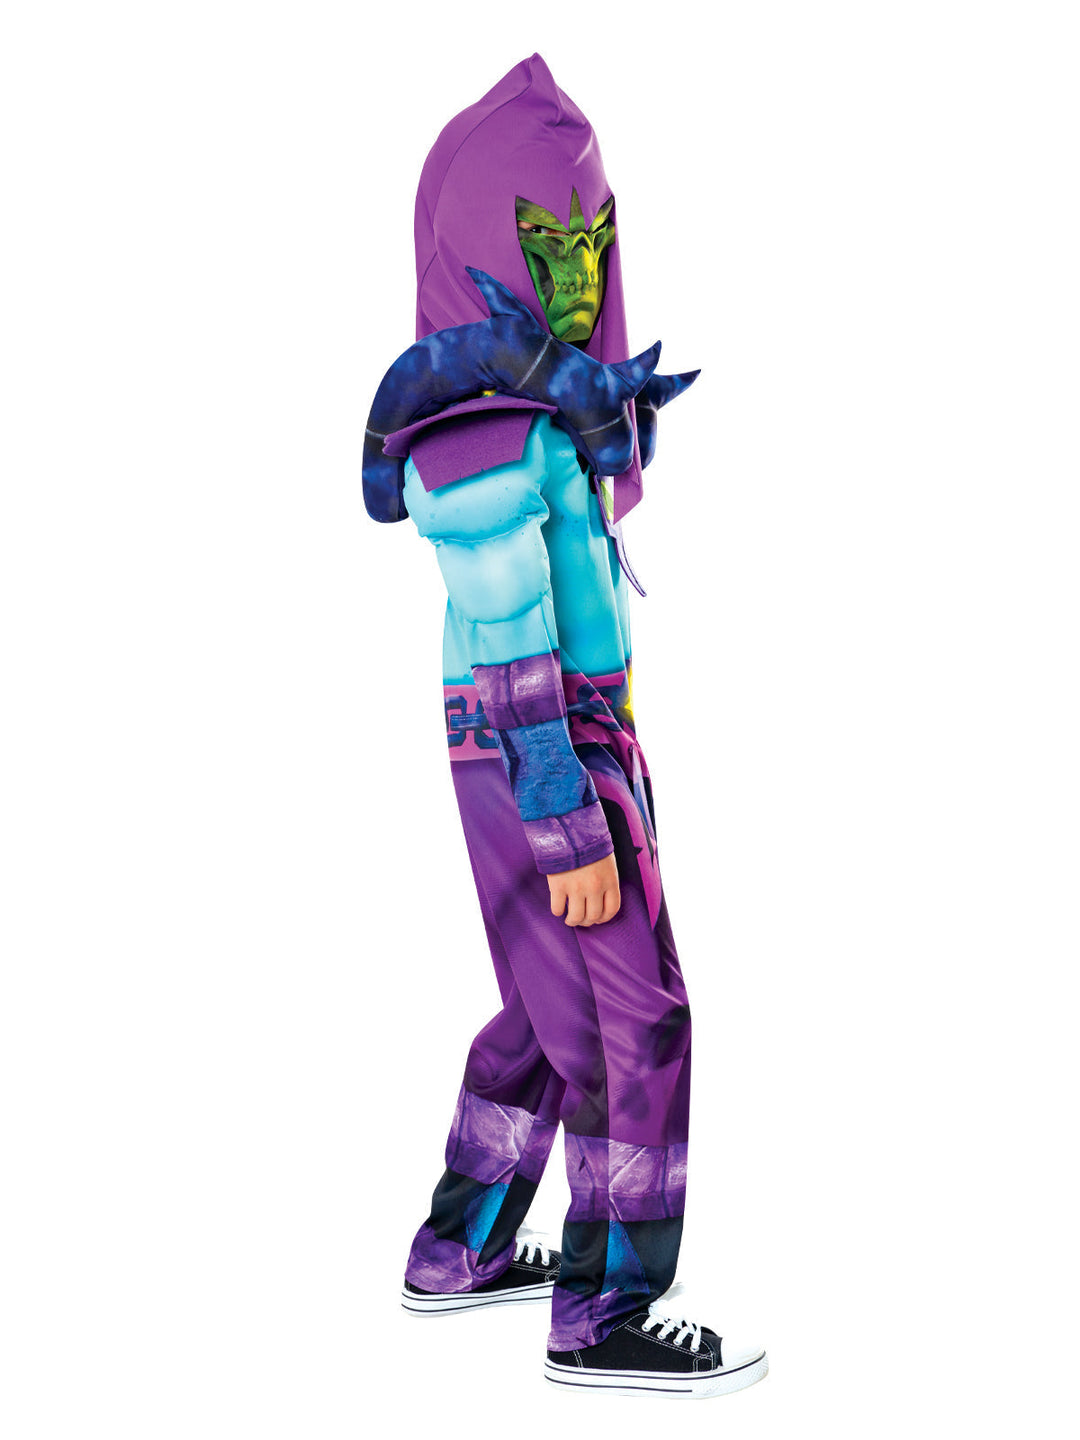 Skeletor Costume for Kids Masters of the Universe Deluxe